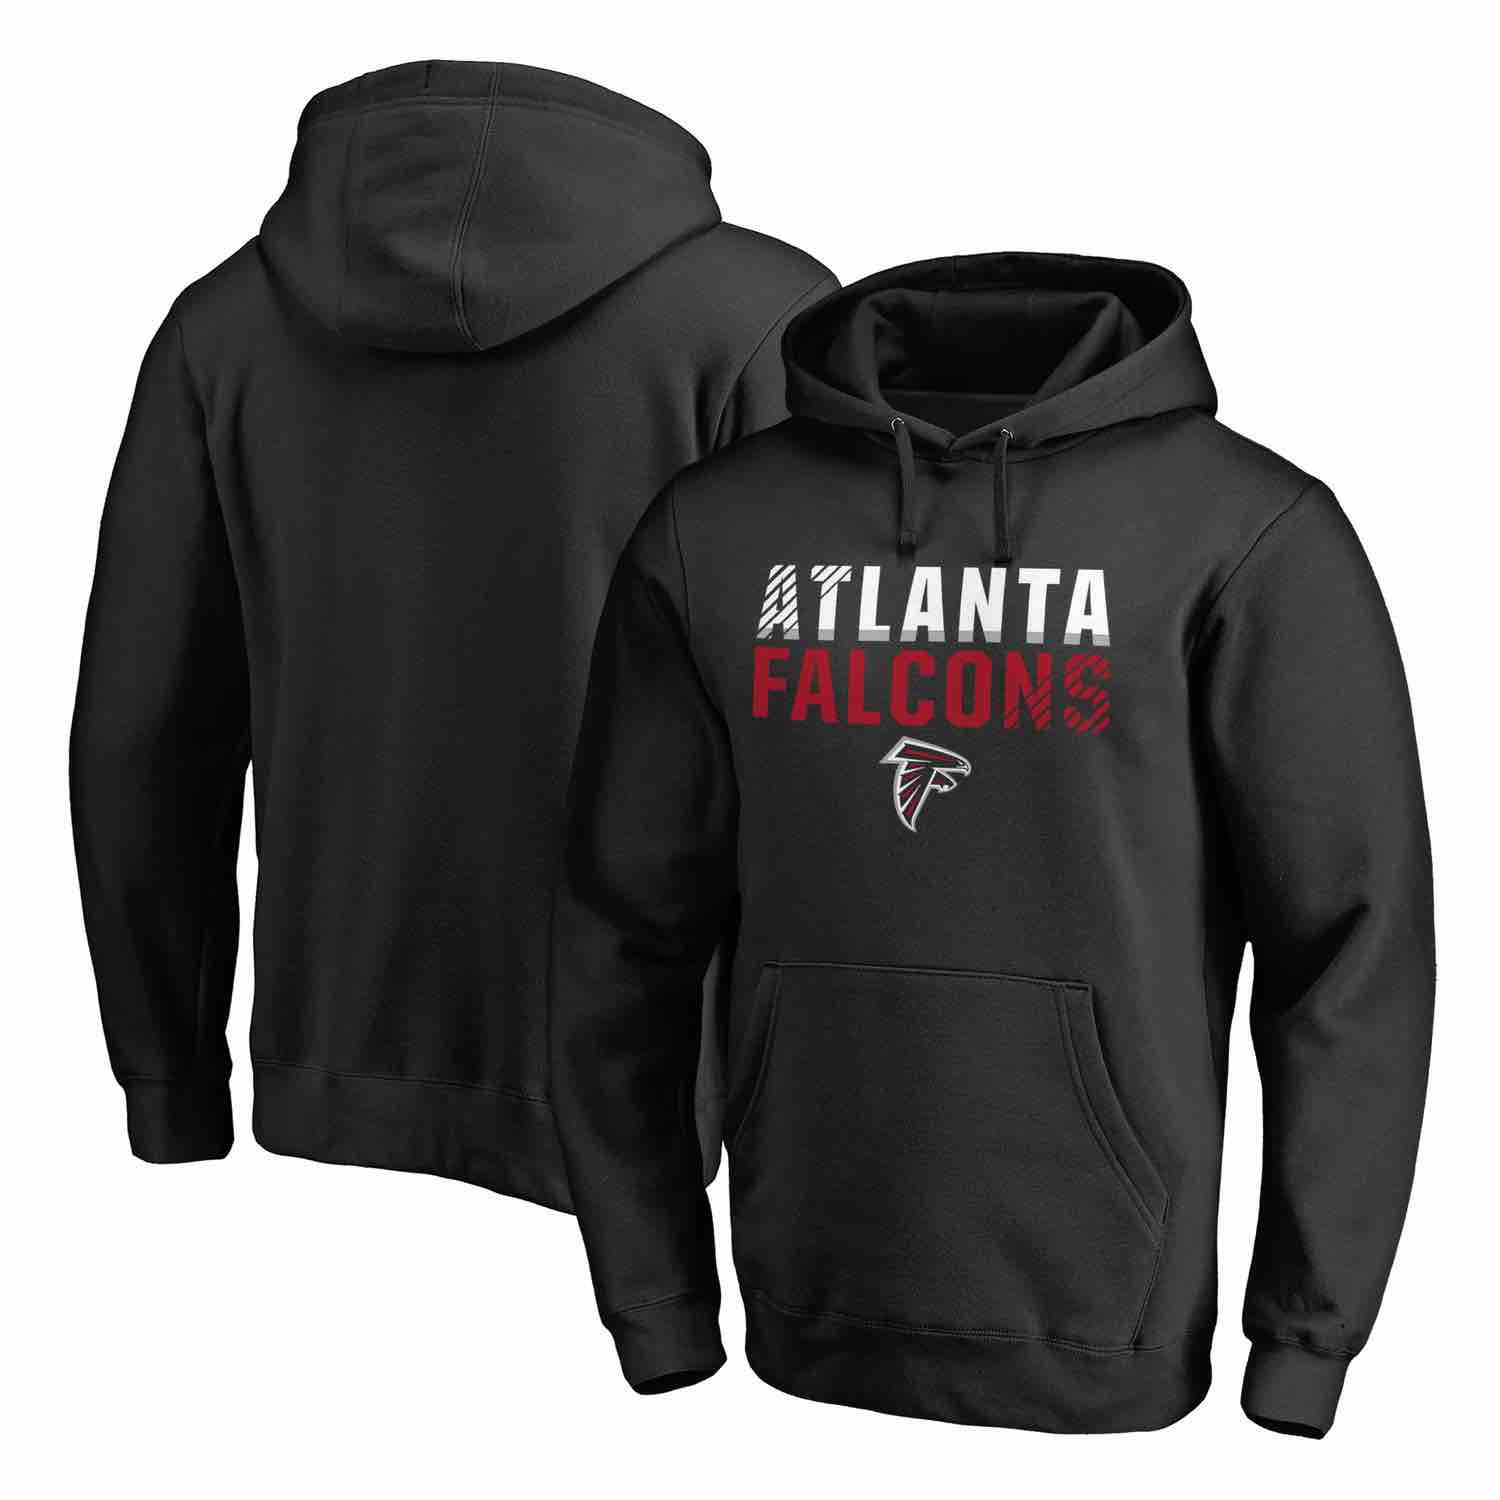 Mens Atlanta Falcons NFL Pro Line by Fanatics Branded Black Iconic Collection Fade Out Pullover Hoodie